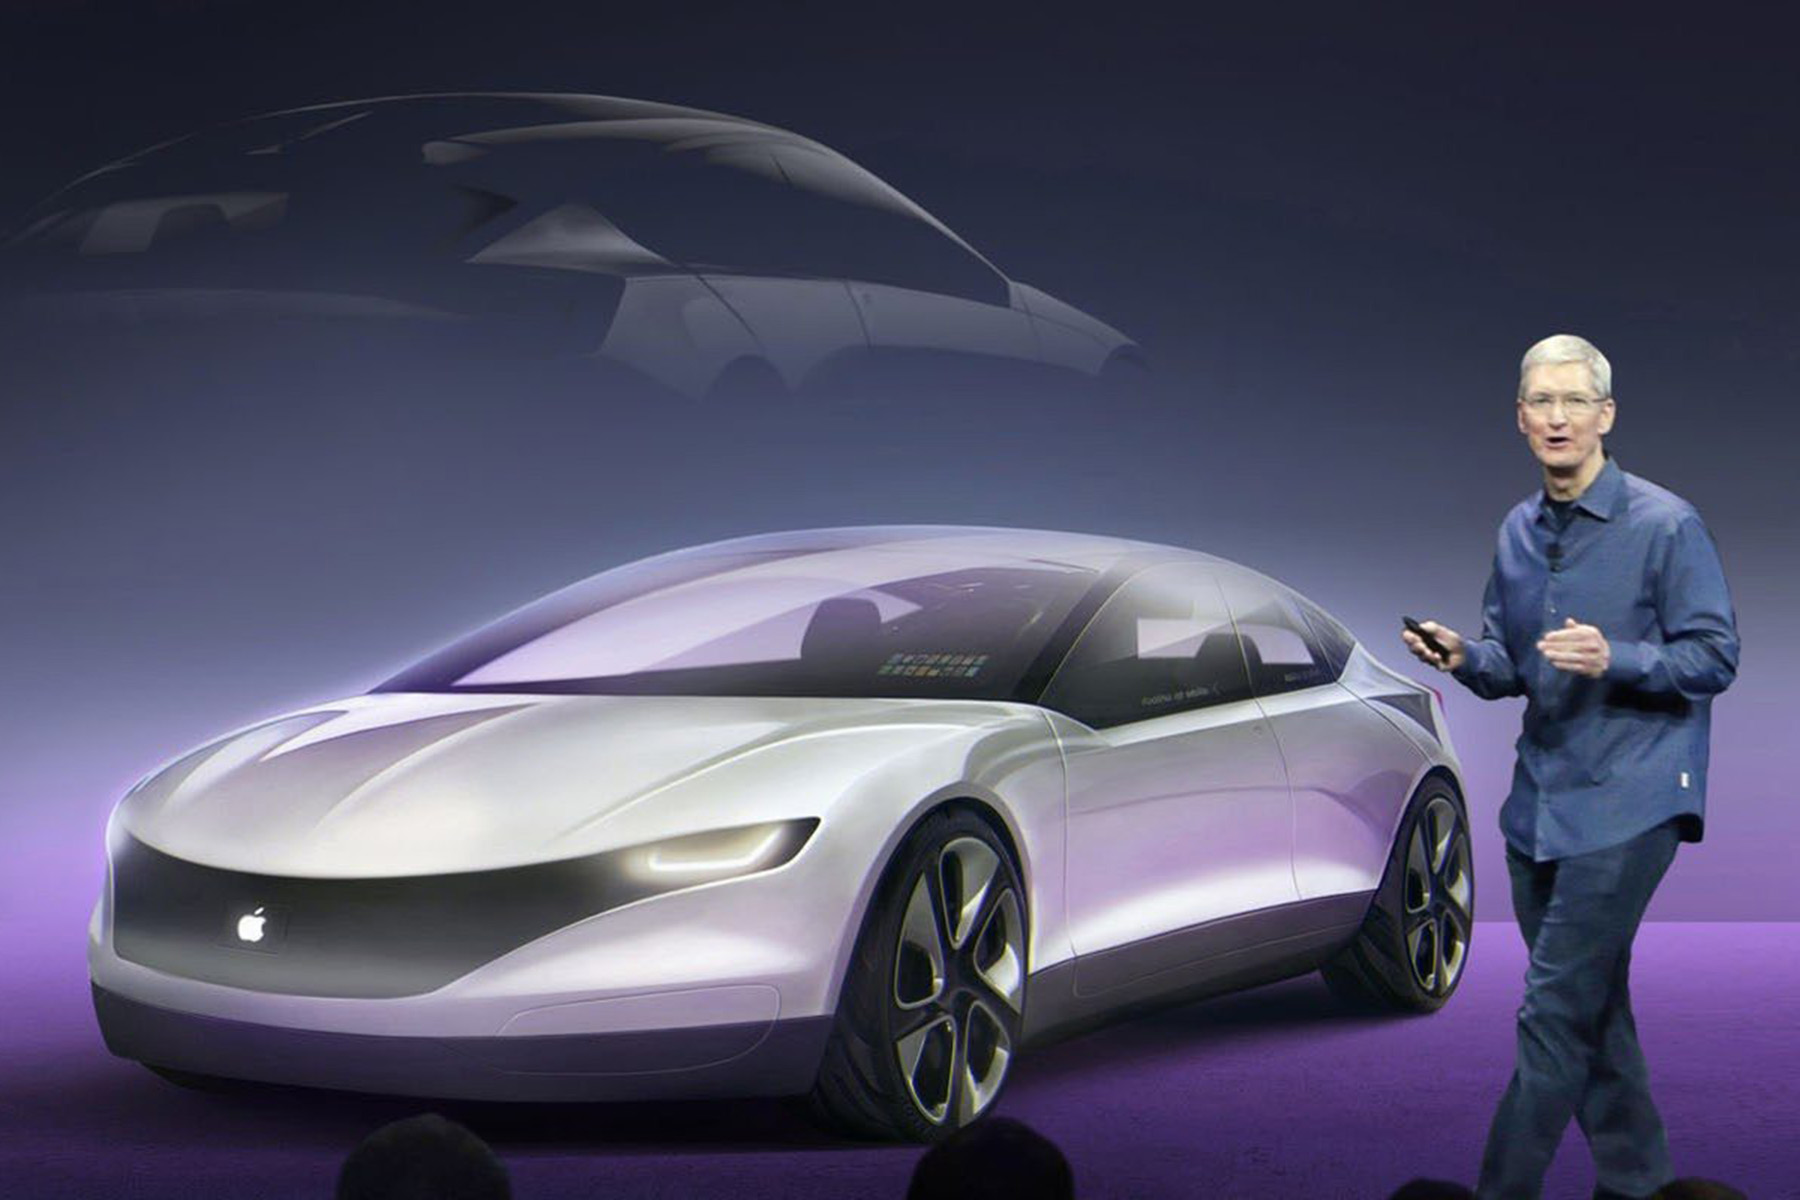 Watch out Tesla, Apple Car may be coming for you by 2024